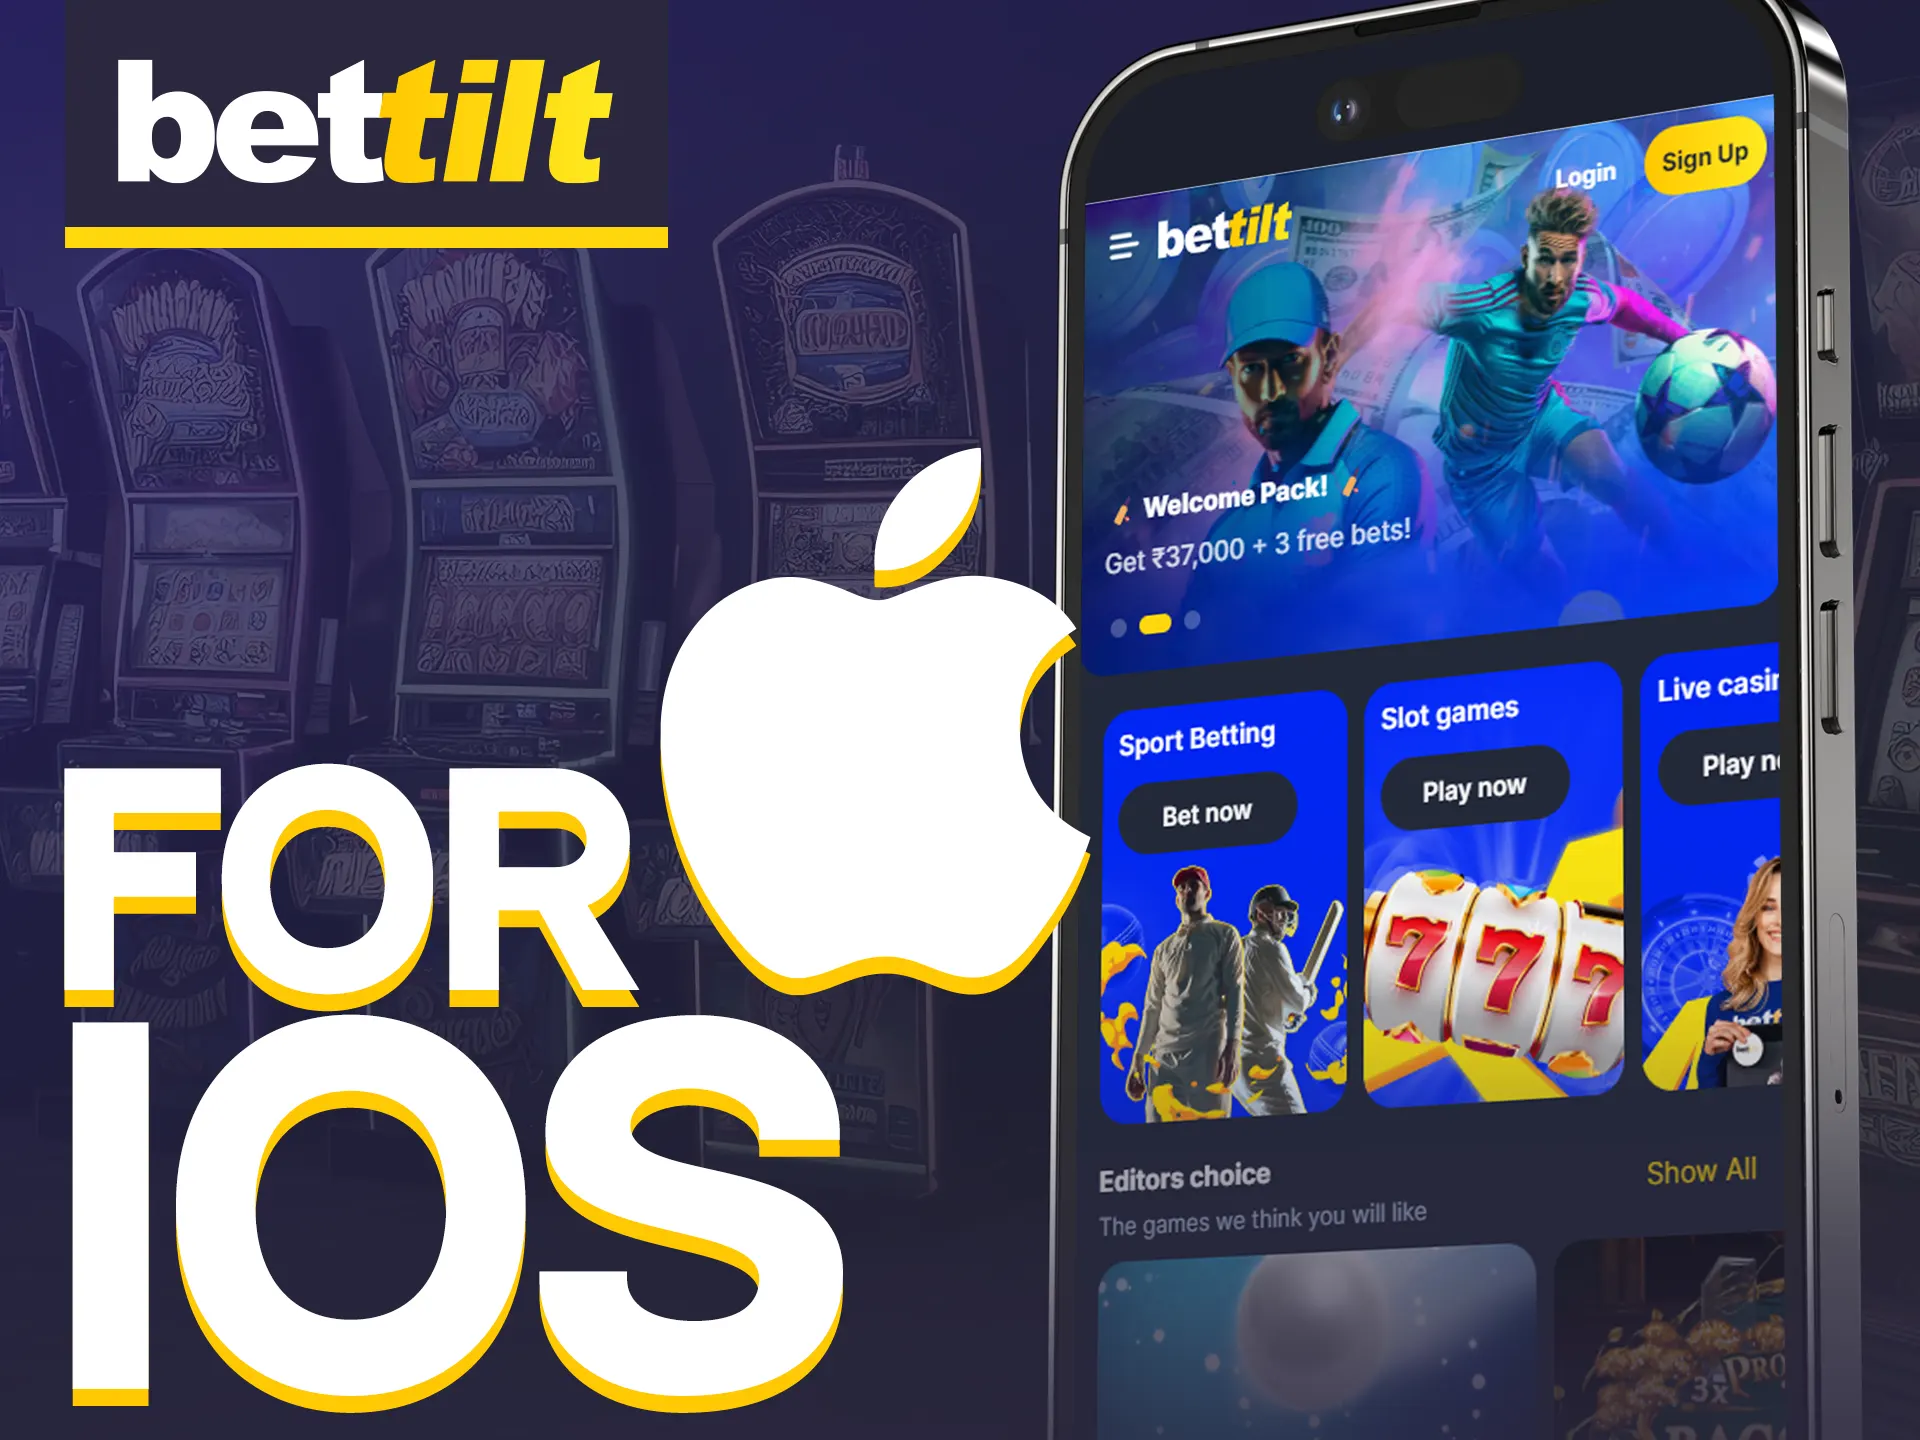 Bettilt's iOS app offers casino games on iPhone and iPad.